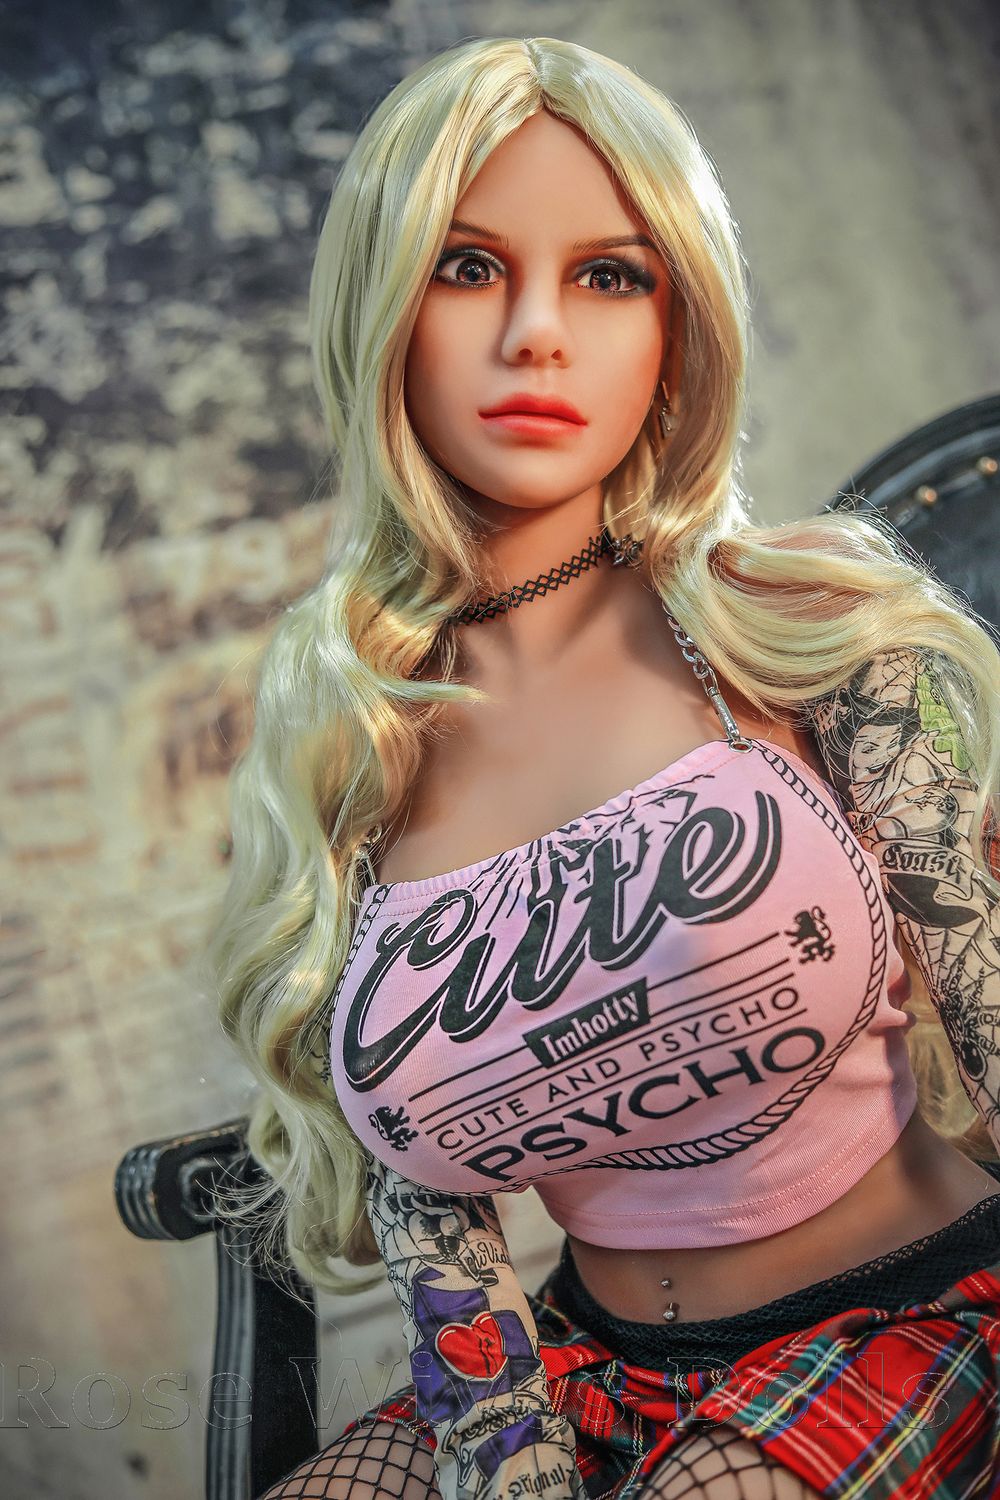 Honey - 4ft7in (140cm) Big Boobs Realistic Sex Doll